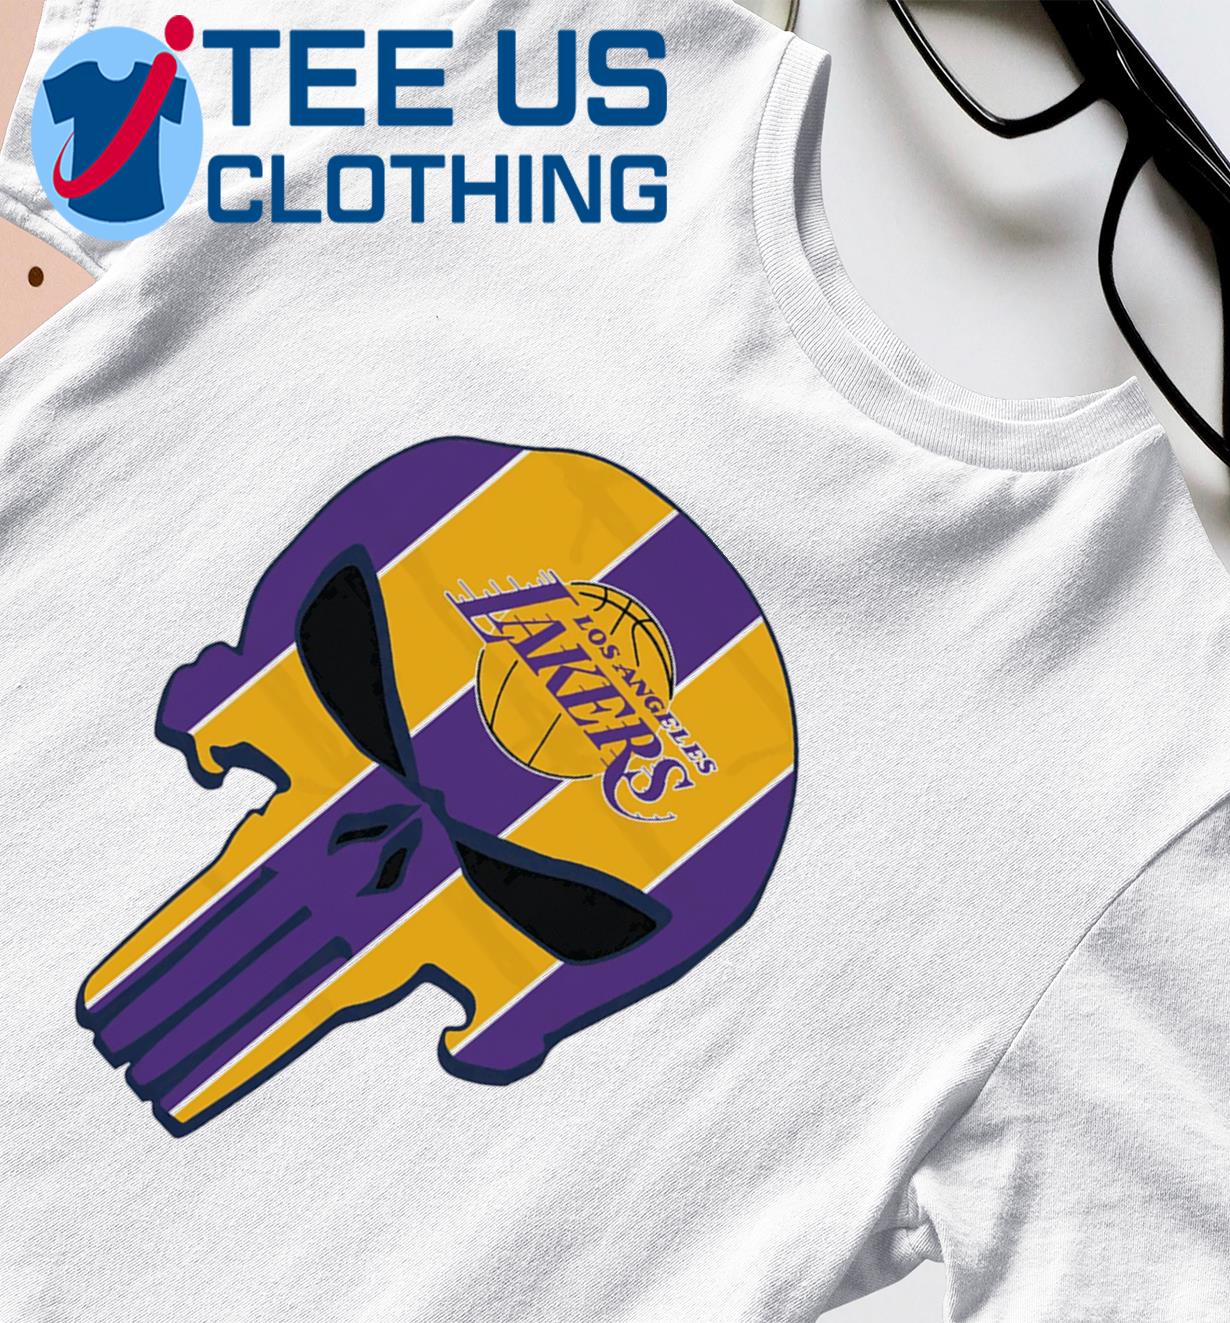 Los Angeles Lakers Lakers Basketball Shirt, hoodie, sweater, long sleeve  and tank top